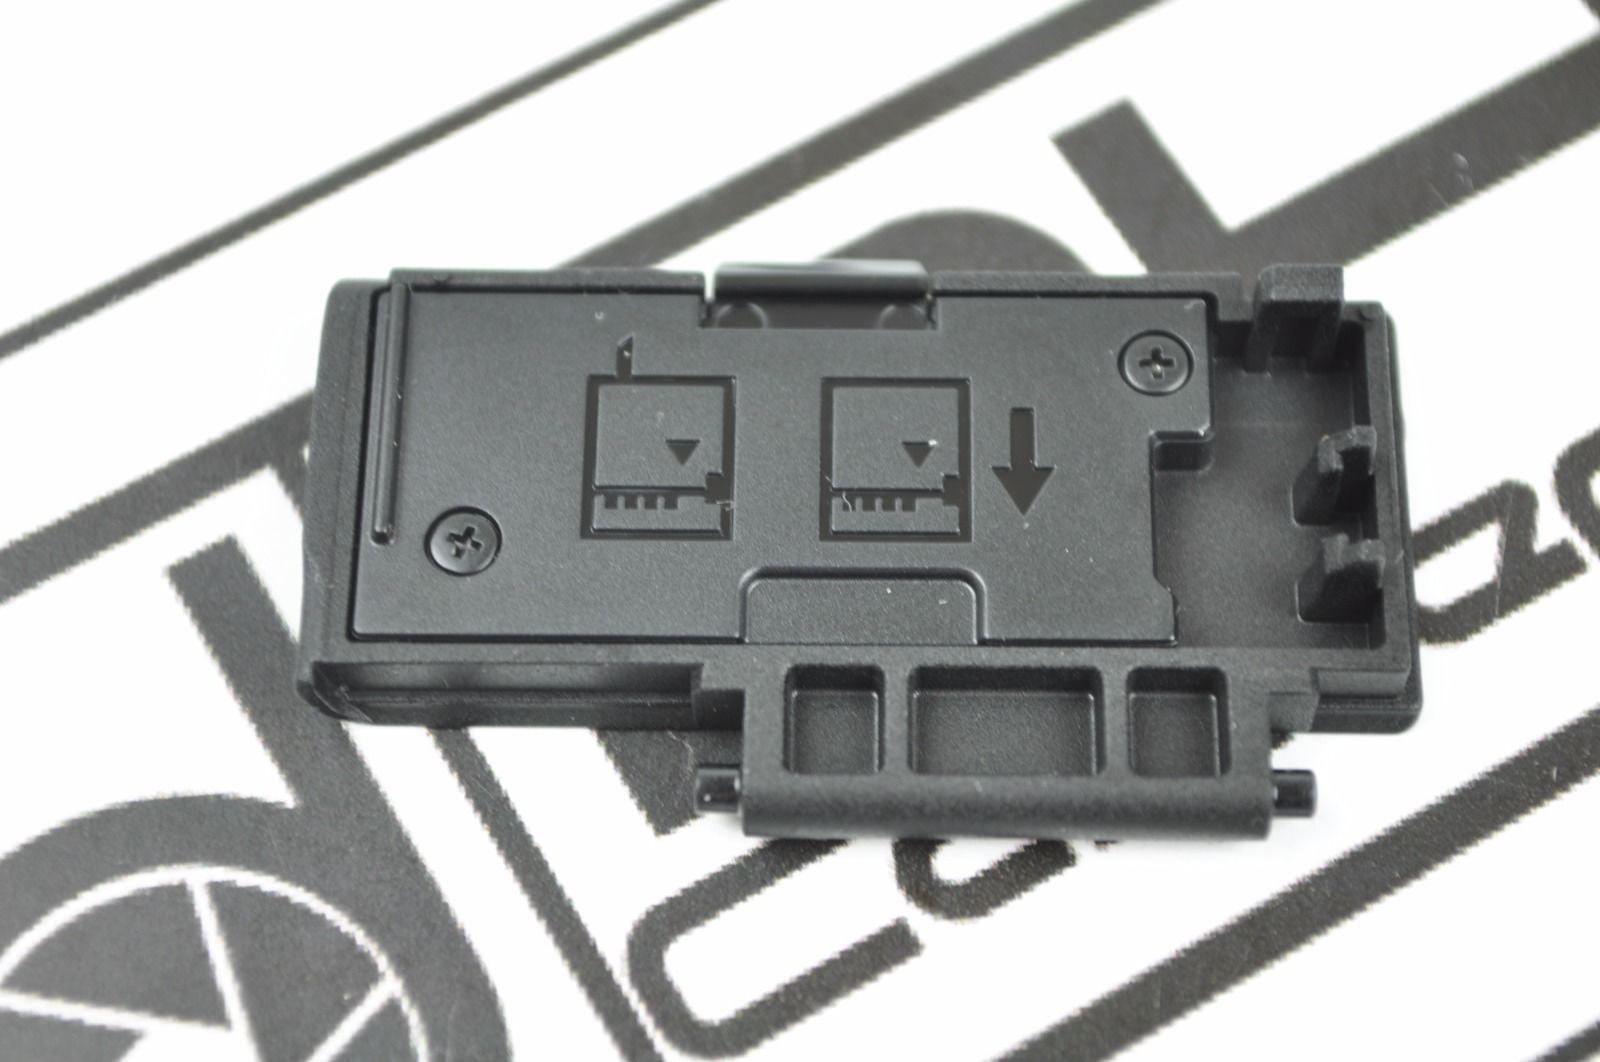 Canon Genuine Battery Door Cover For Canon 760D T6I  T6S CG2-4618 Repair Part 